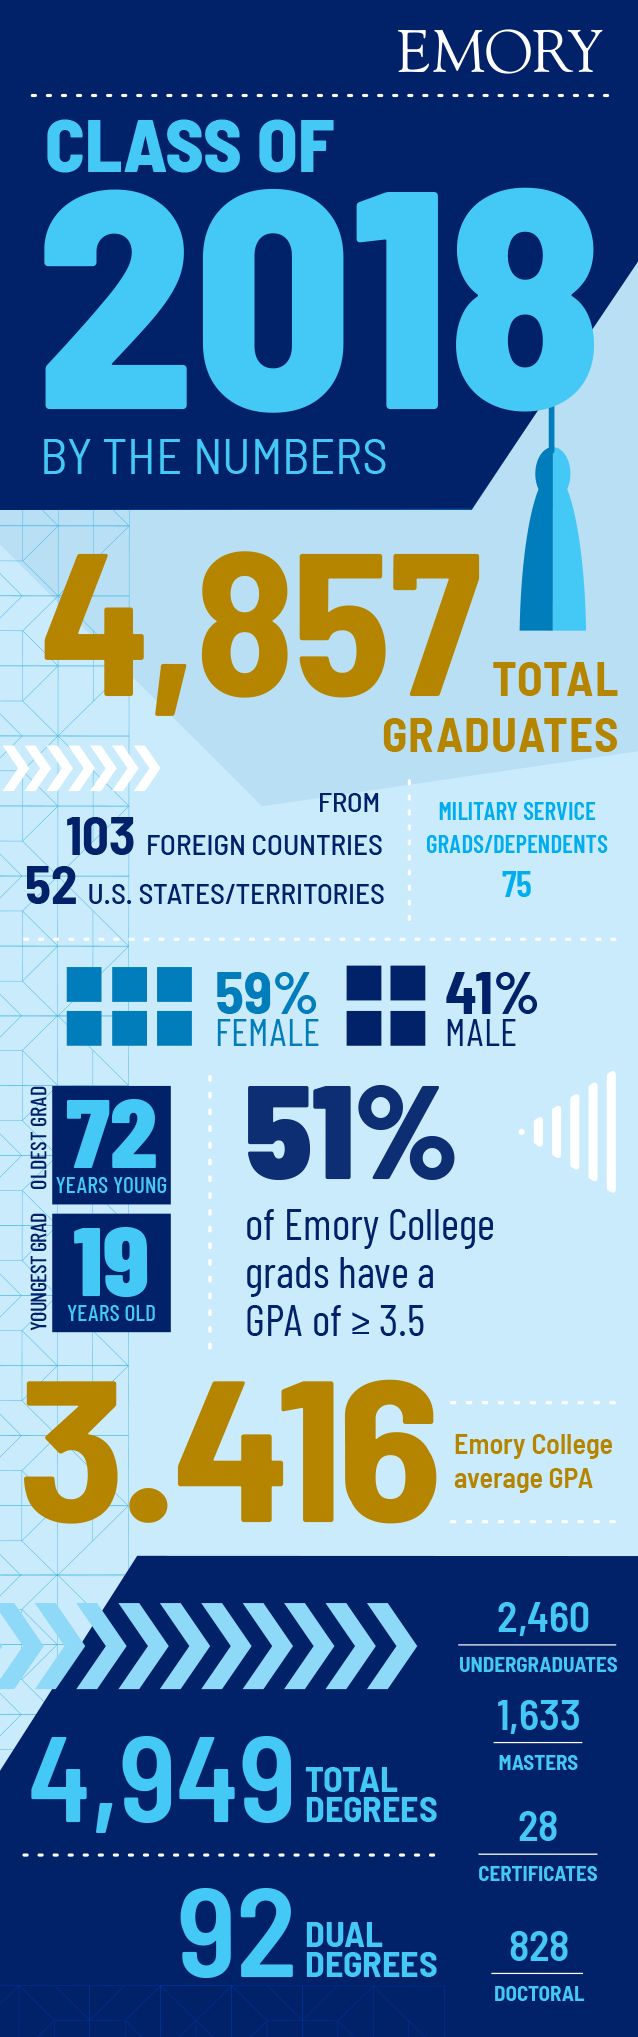 An infographic shows statistics on the Class of 2018: 4,857 total graduates from 52 U.S. states and territories and 103 foreign countries; 75 military service grads or dependents; 59 percent female and 41 percent male; oldest is 72 and youngest is 19. Average Emory College GPA is 3.416 and 51 percent of Emory College grads have GPA greater than or equal to 3.5. There were a total of 4,949 degrees; including 92 dual degrees: 2,460 undergraduate, 1,633 masters, 28 certificates and 828 doctoral.